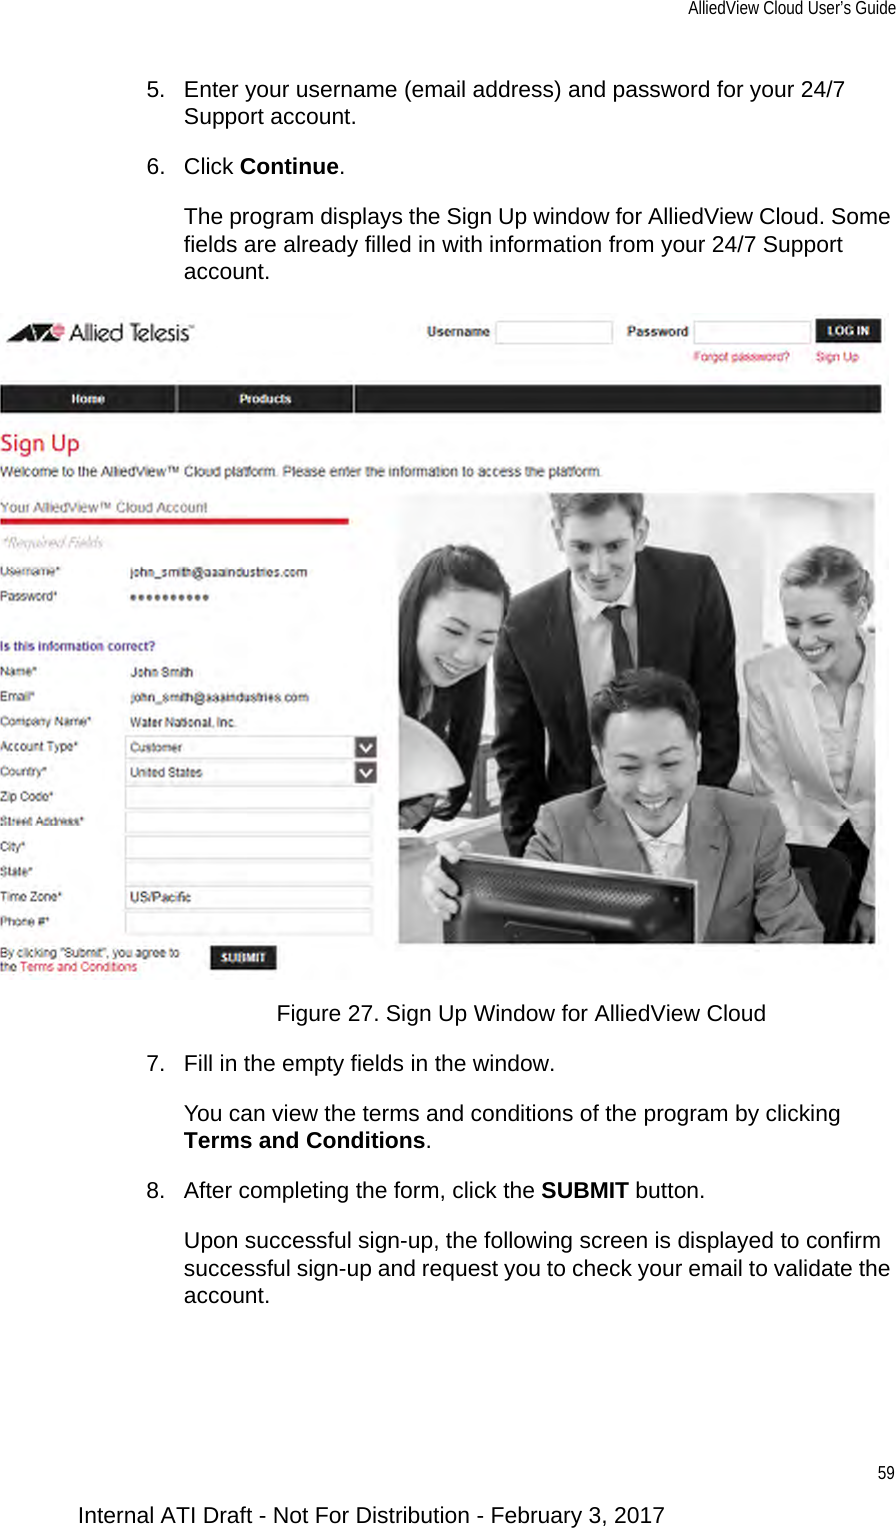 AlliedView Cloud User’s Guide595. Enter your username (email address) and password for your 24/7 Support account.6. Click Continue.The program displays the Sign Up window for AlliedView Cloud. Some fields are already filled in with information from your 24/7 Support account.Figure 27. Sign Up Window for AlliedView Cloud7. Fill in the empty fields in the window.You can view the terms and conditions of the program by clicking Terms and Conditions.8. After completing the form, click the SUBMIT button.Upon successful sign-up, the following screen is displayed to confirm successful sign-up and request you to check your email to validate the account.Internal ATI Draft - Not For Distribution - February 3, 2017